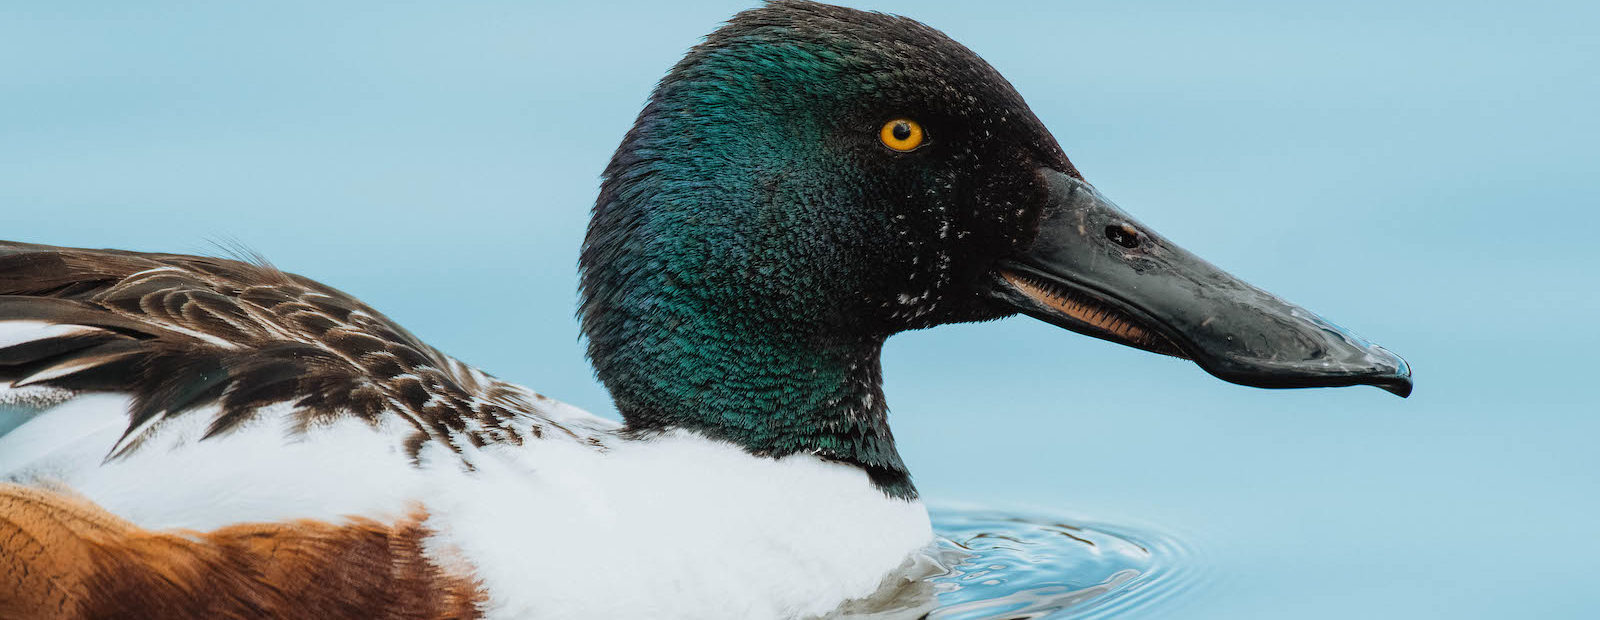 A male northern shoveler duck, or spoonie